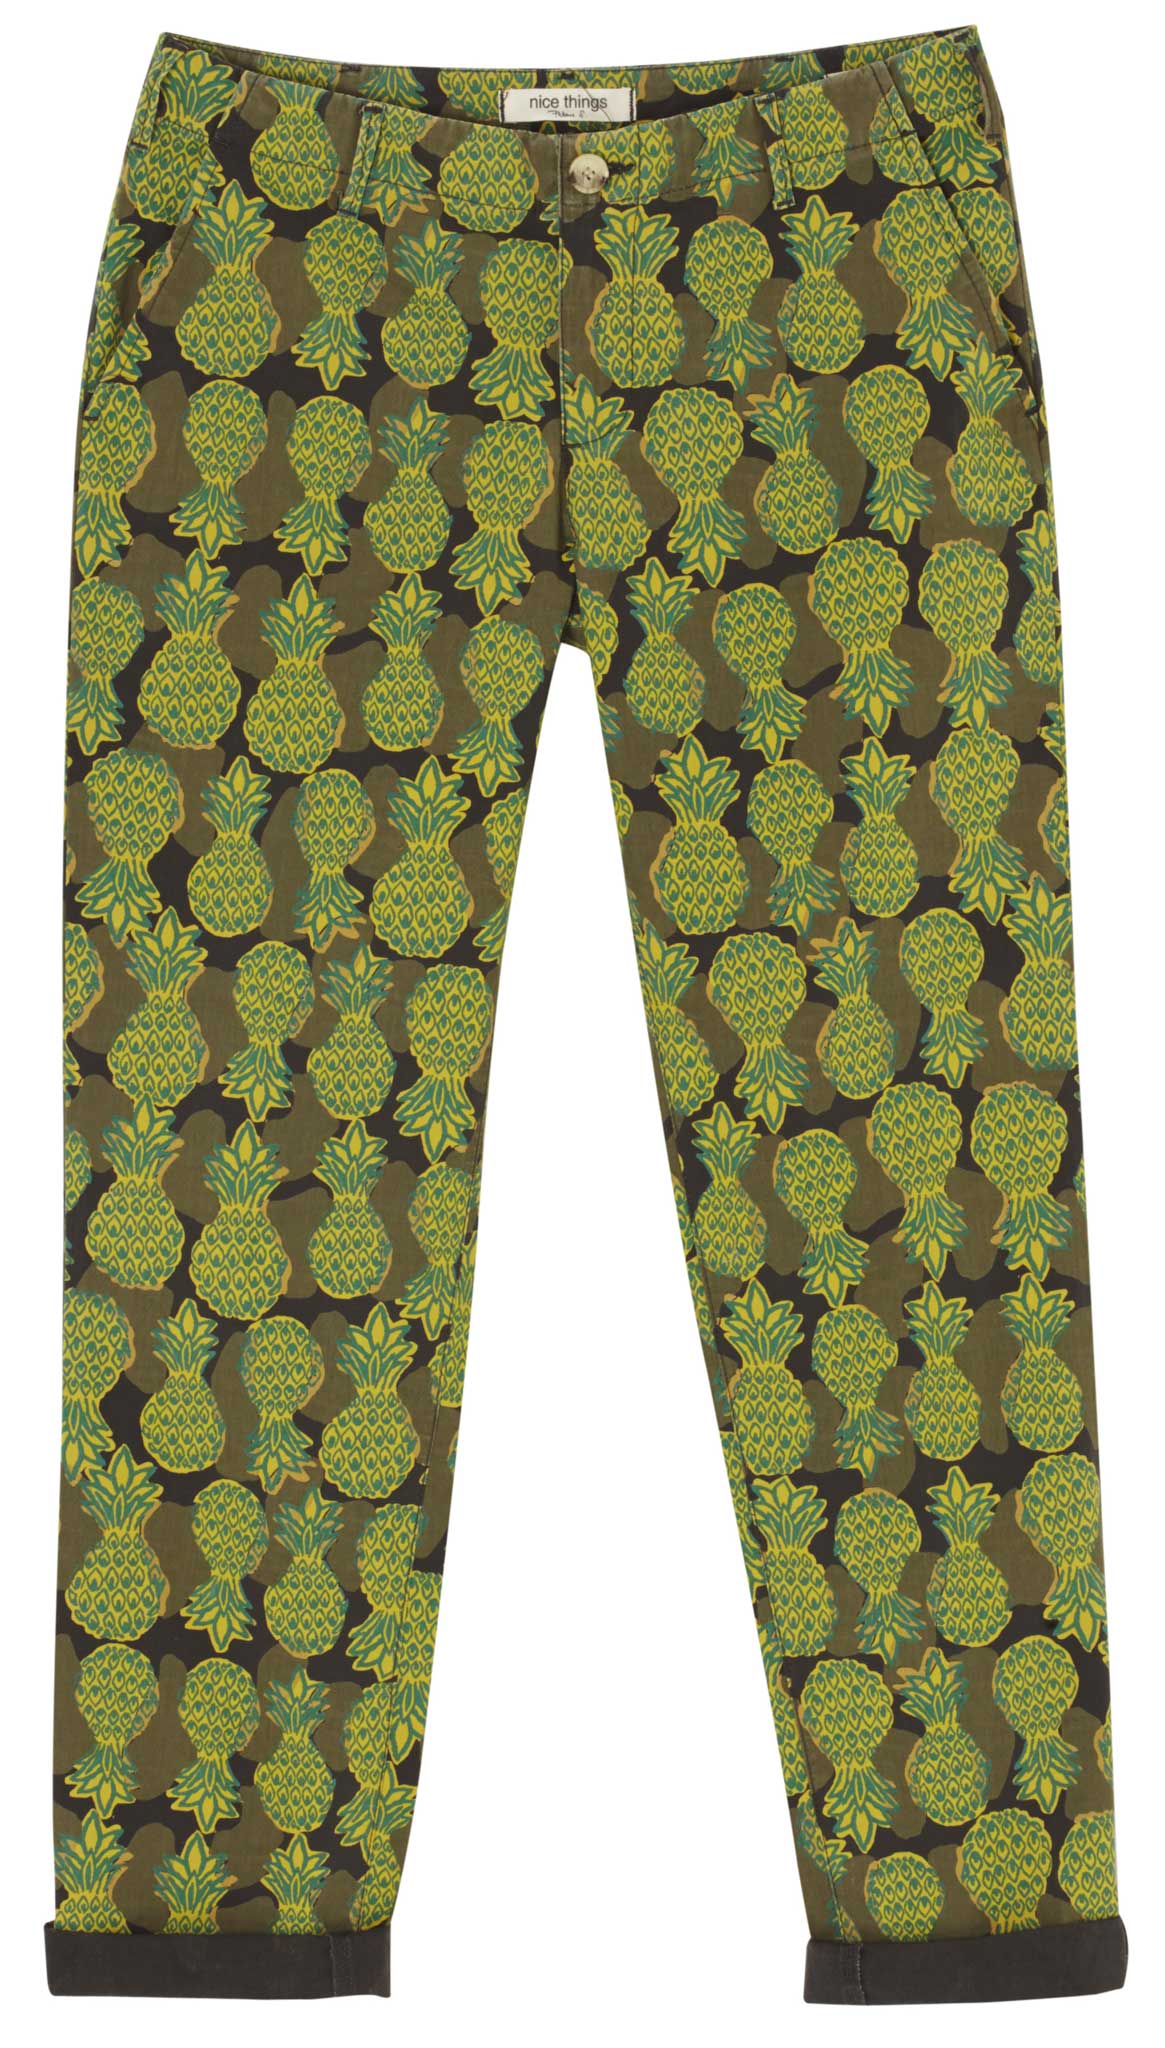 These pineapple-print chinos are perfect for injecting a bit of fruity humour into your casual everyday-wear